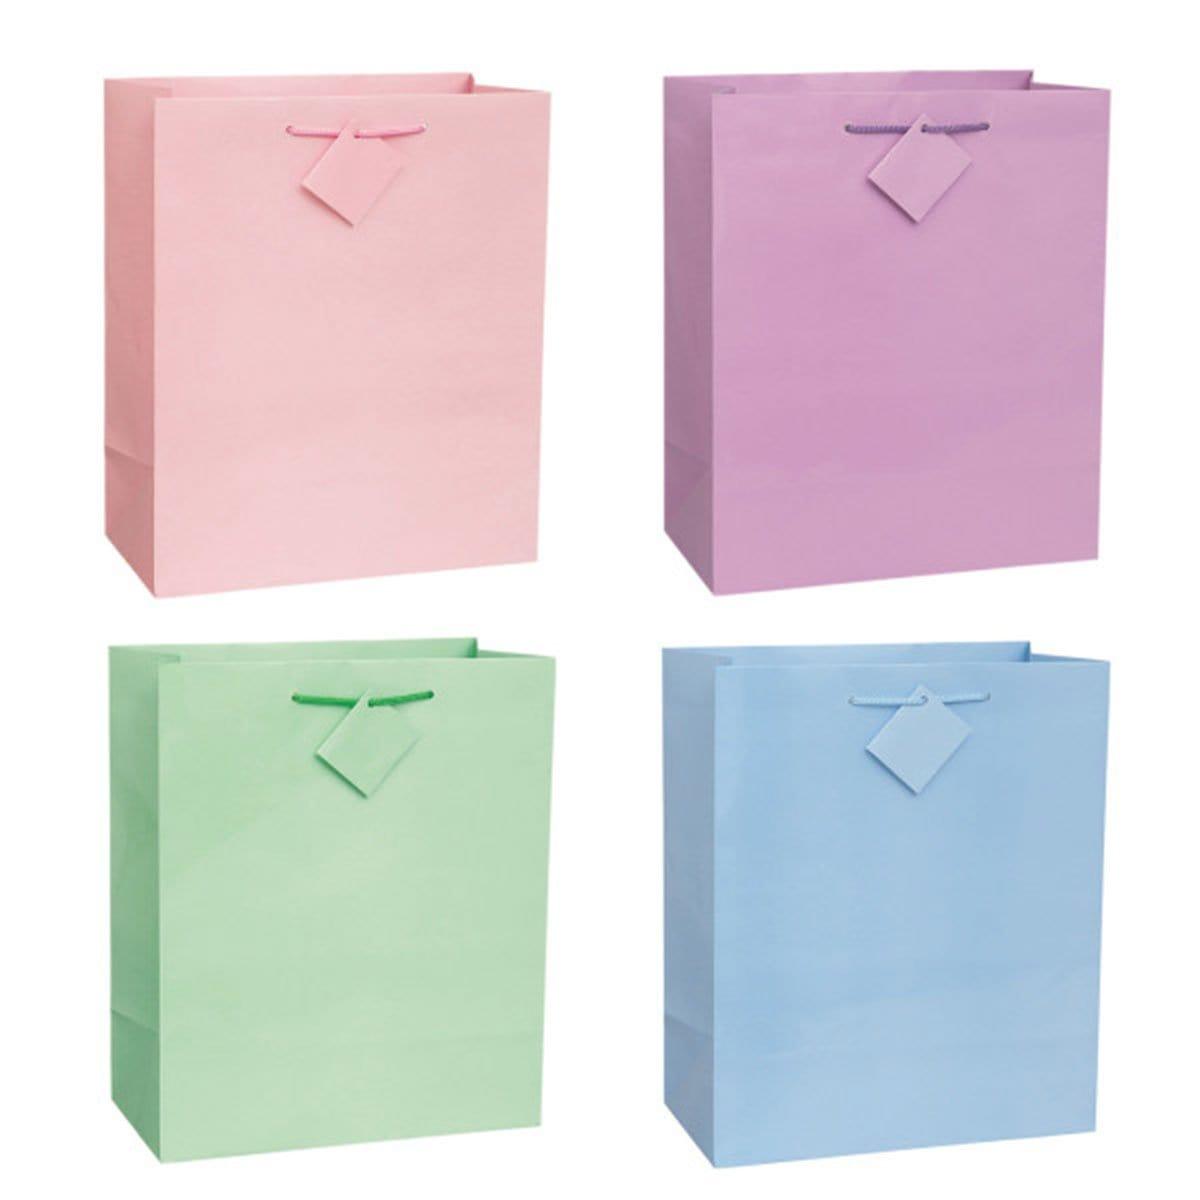 Buy Gift Wrap & Bags Pastel Gift Bag, Assortment, 1 Count sold at Party Expert